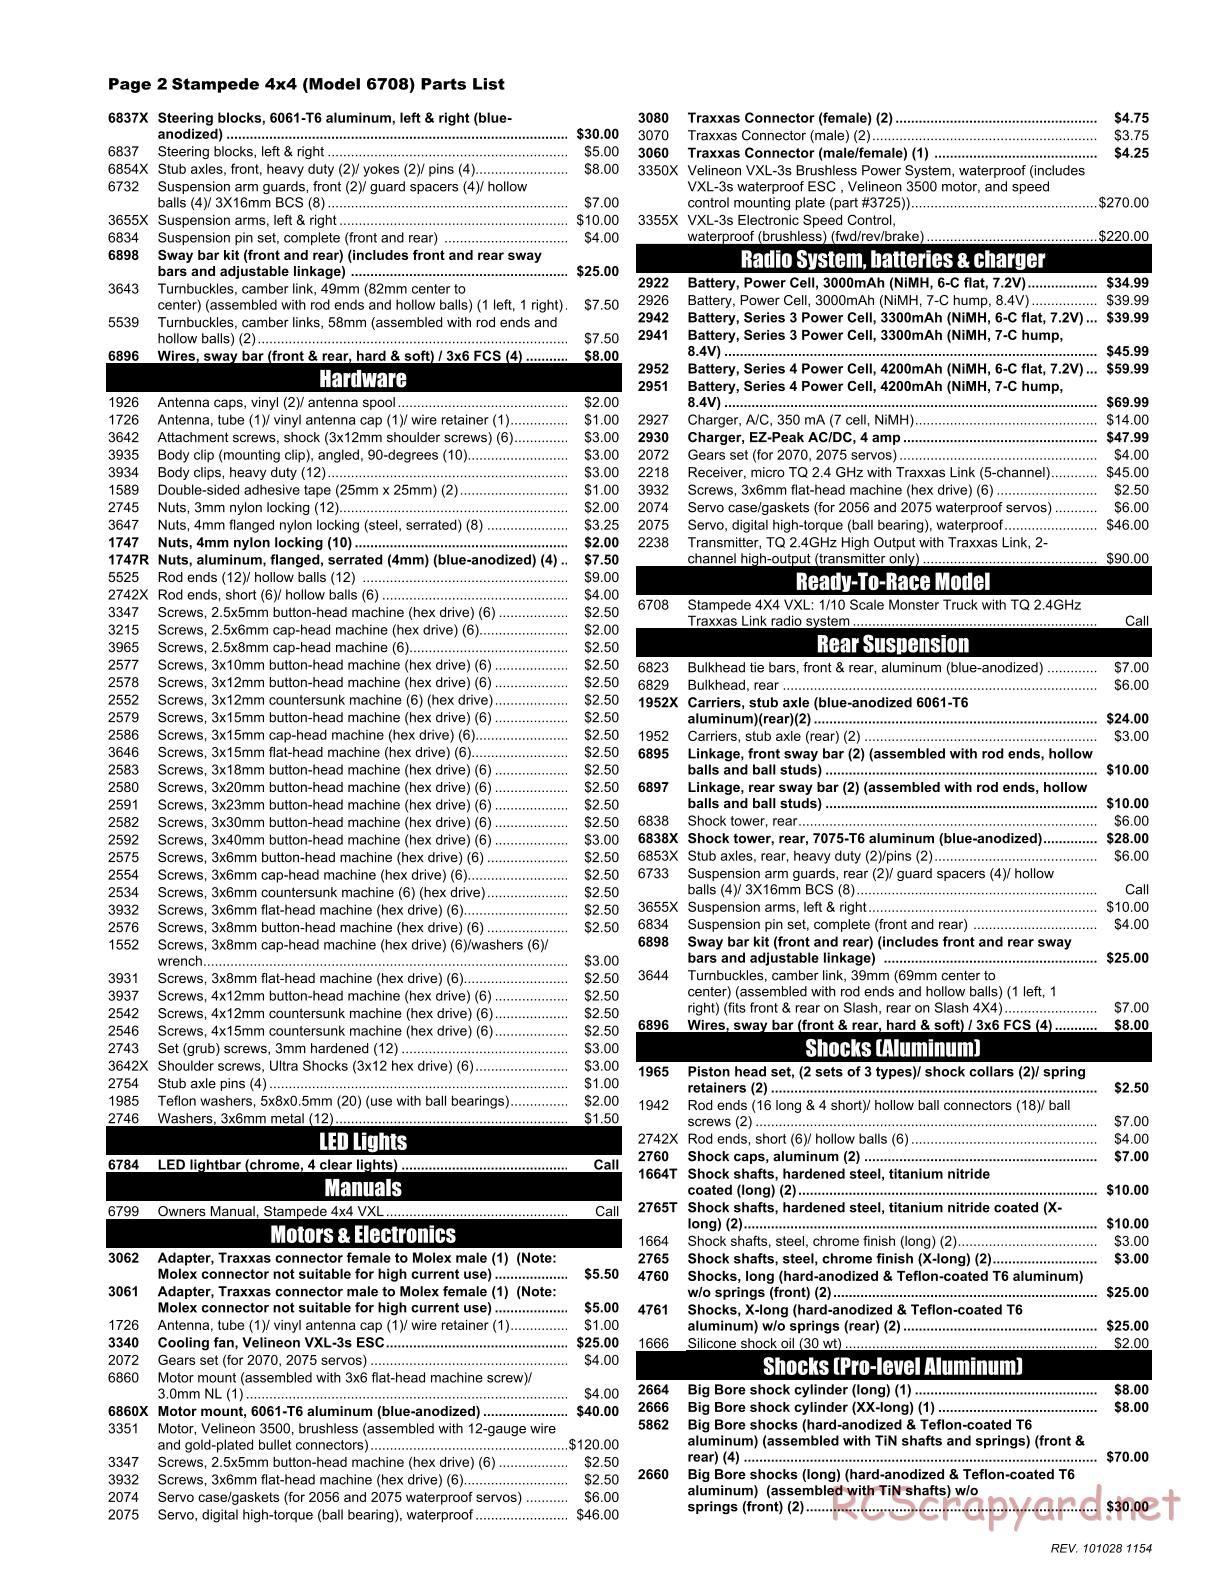 Traxxas - Stampede 4x4 VXL (2010) - Parts List - Page 2